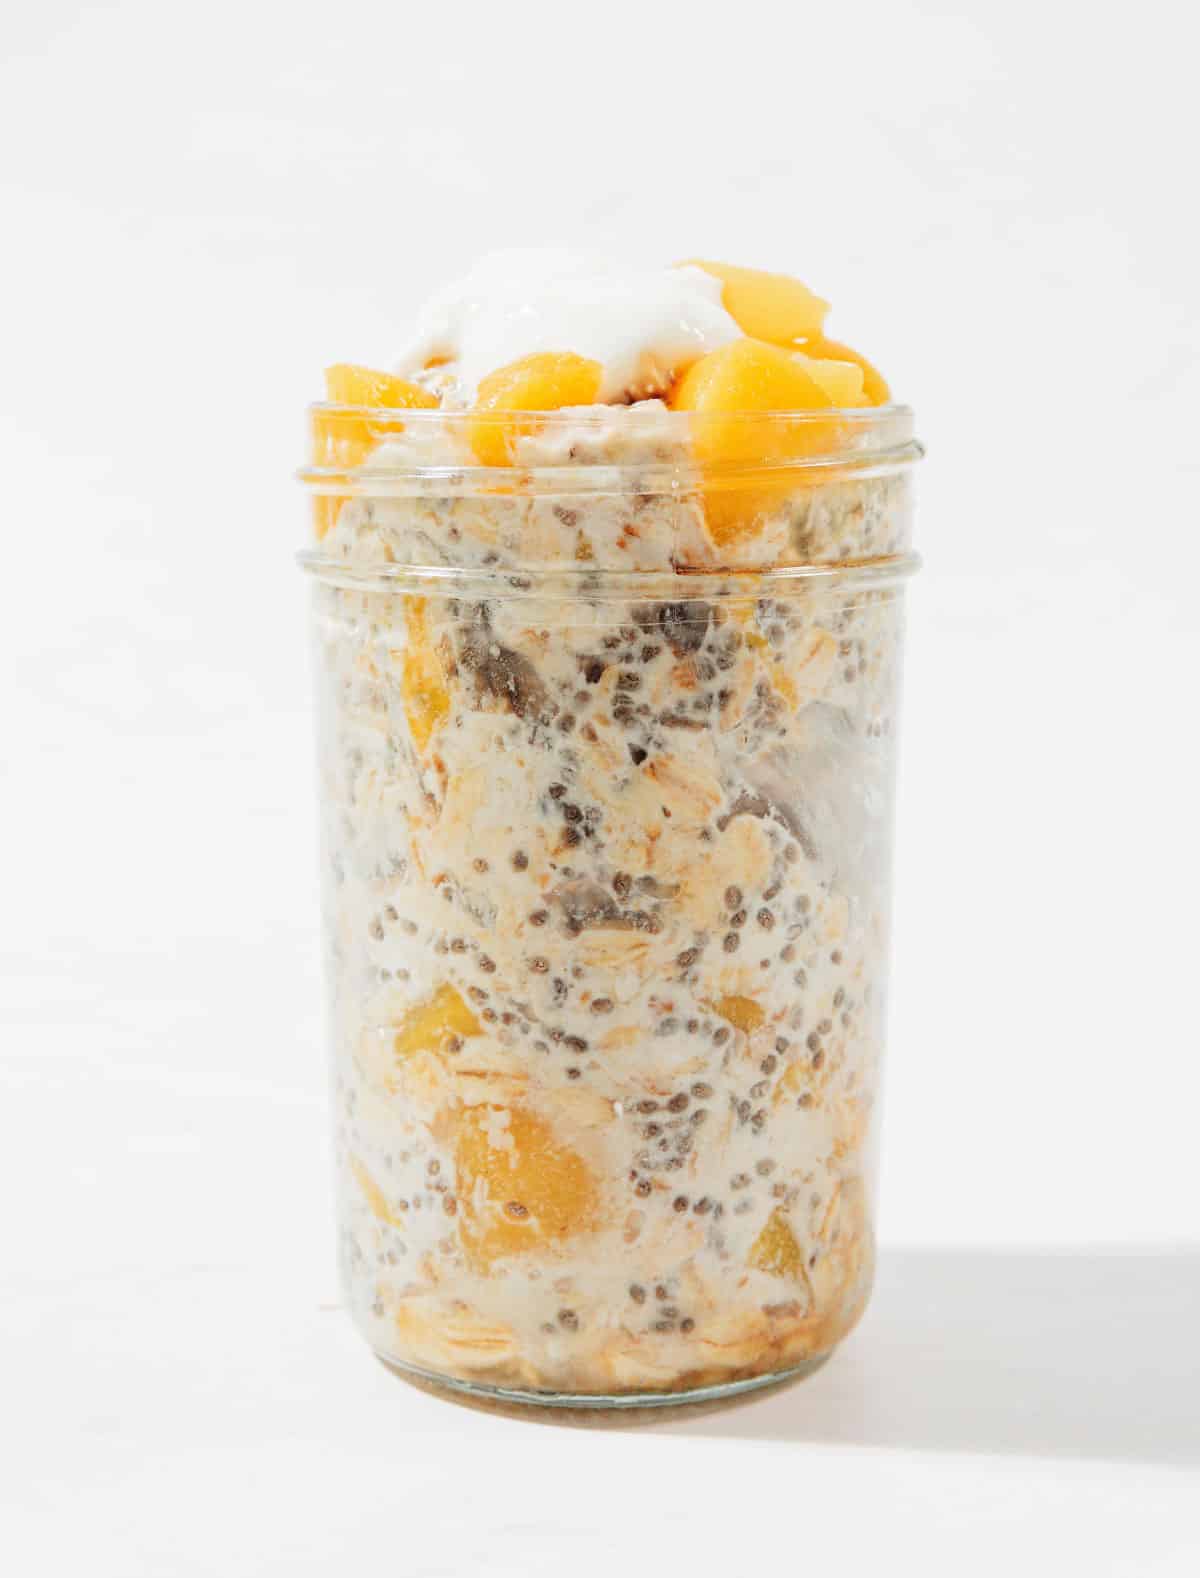 Ingredients for peach overnight oats in a jar.